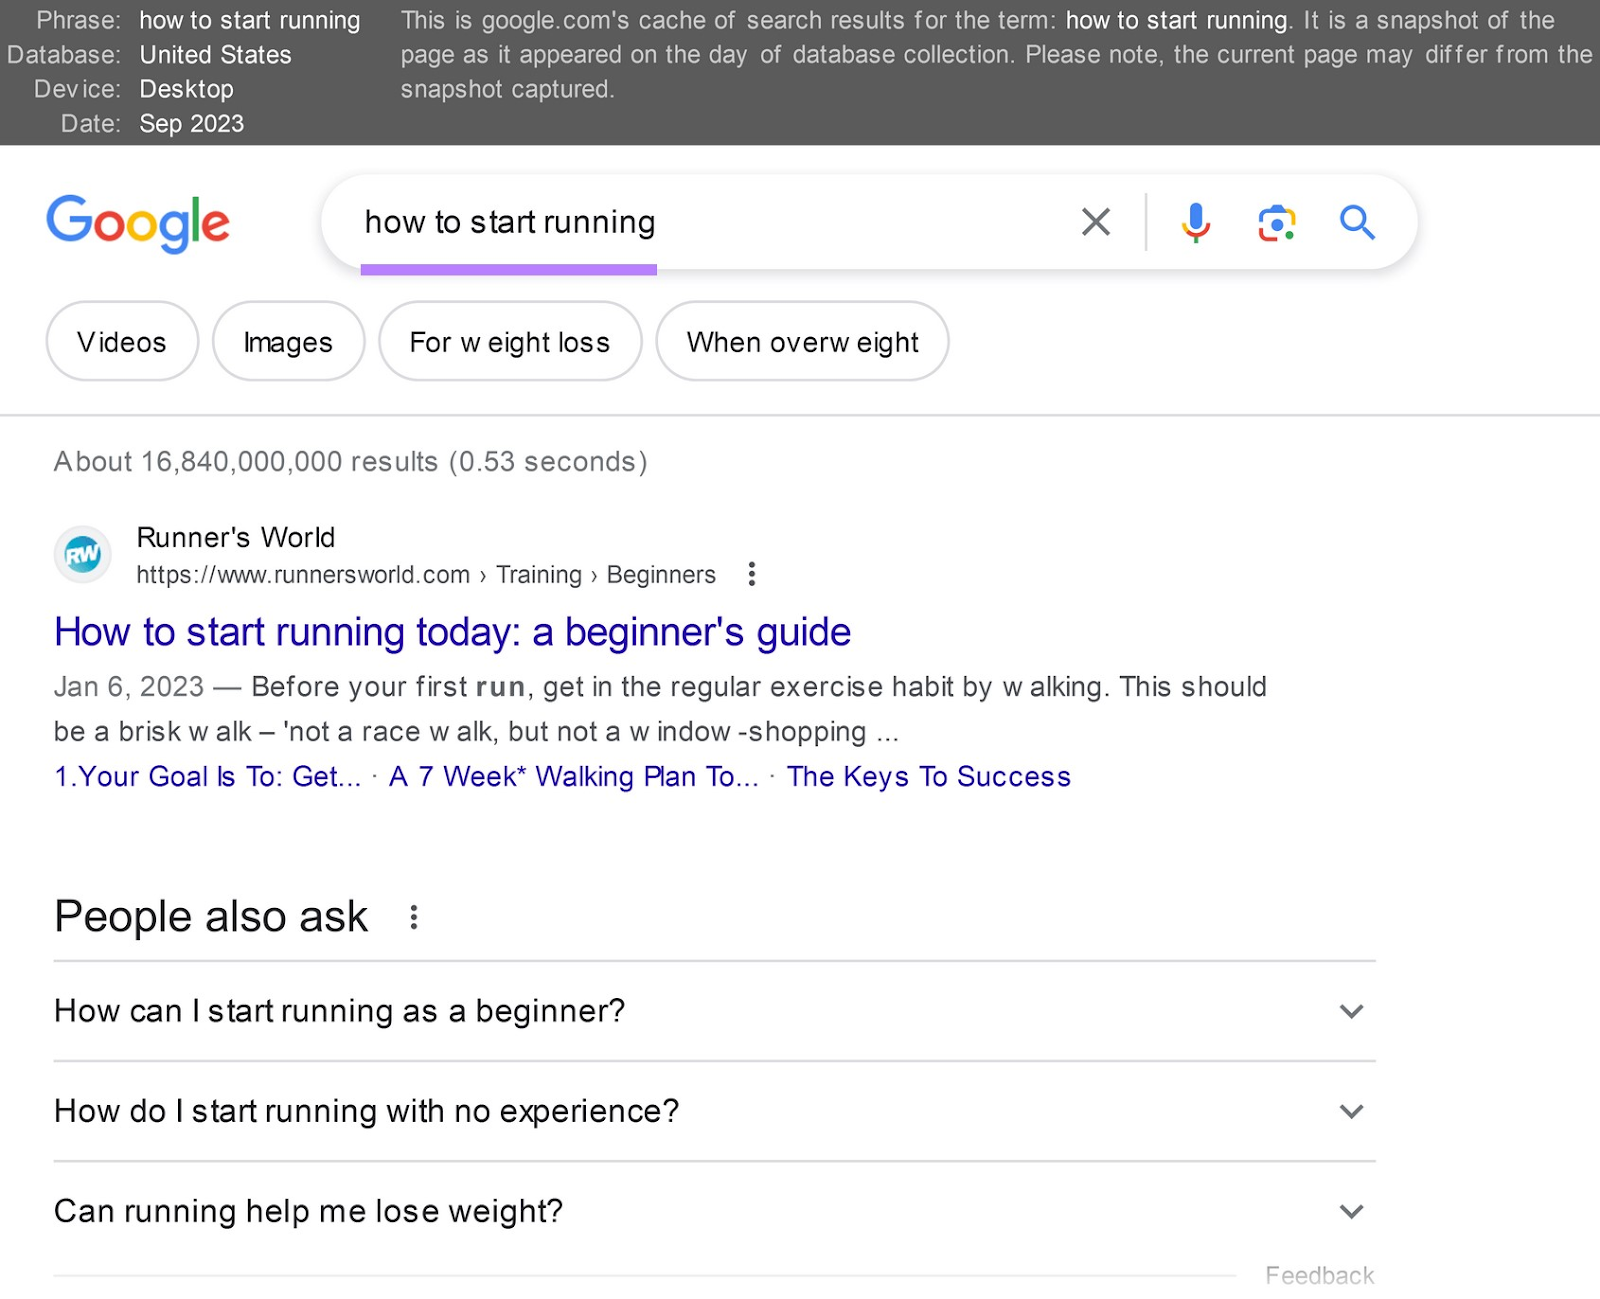 Live view of the SERP for "how to start running" search